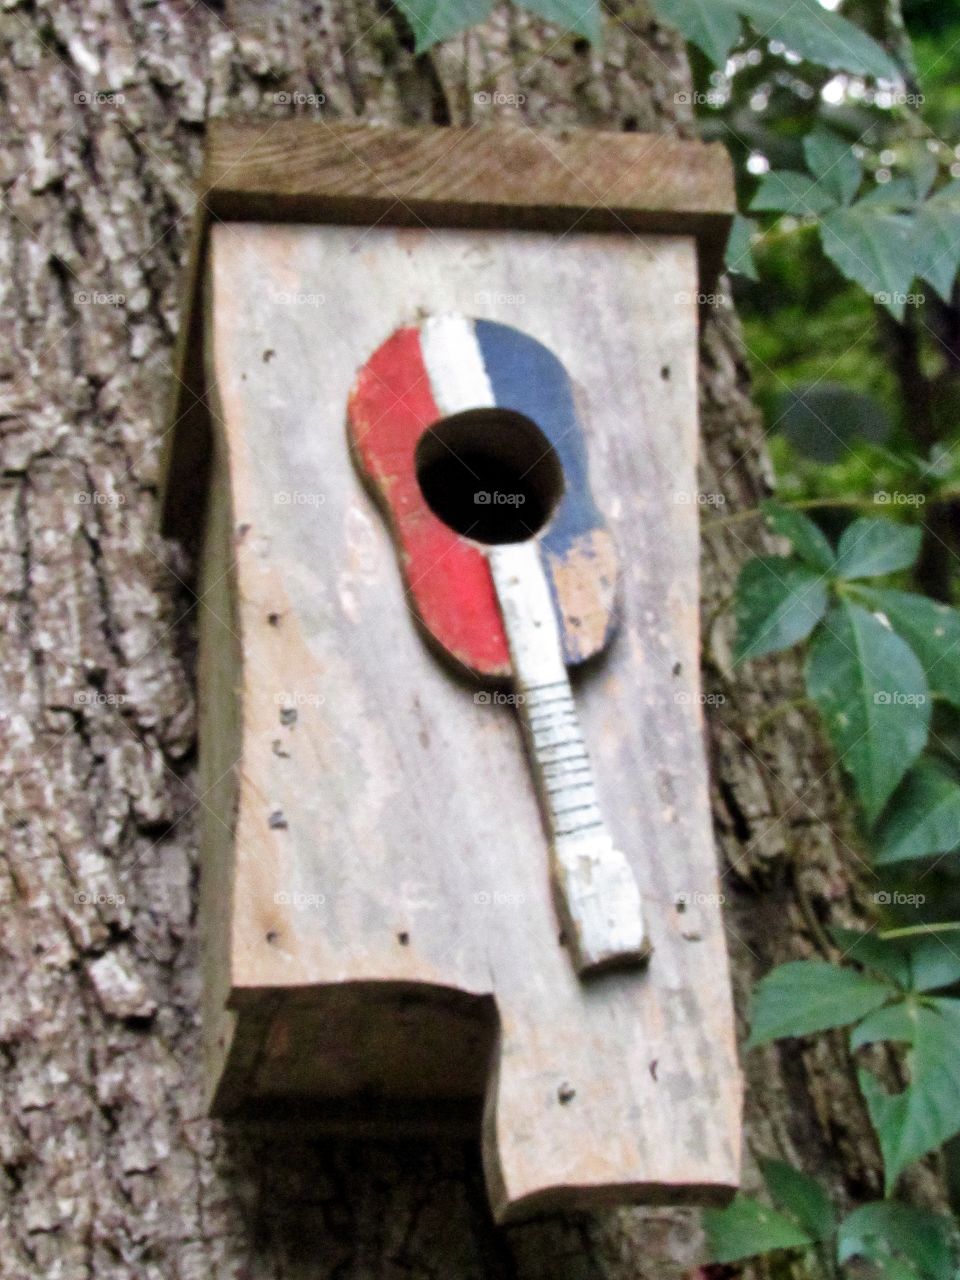 wooden bird house in shape of Mississippi with red, white and blue guitar on front hanging on tree